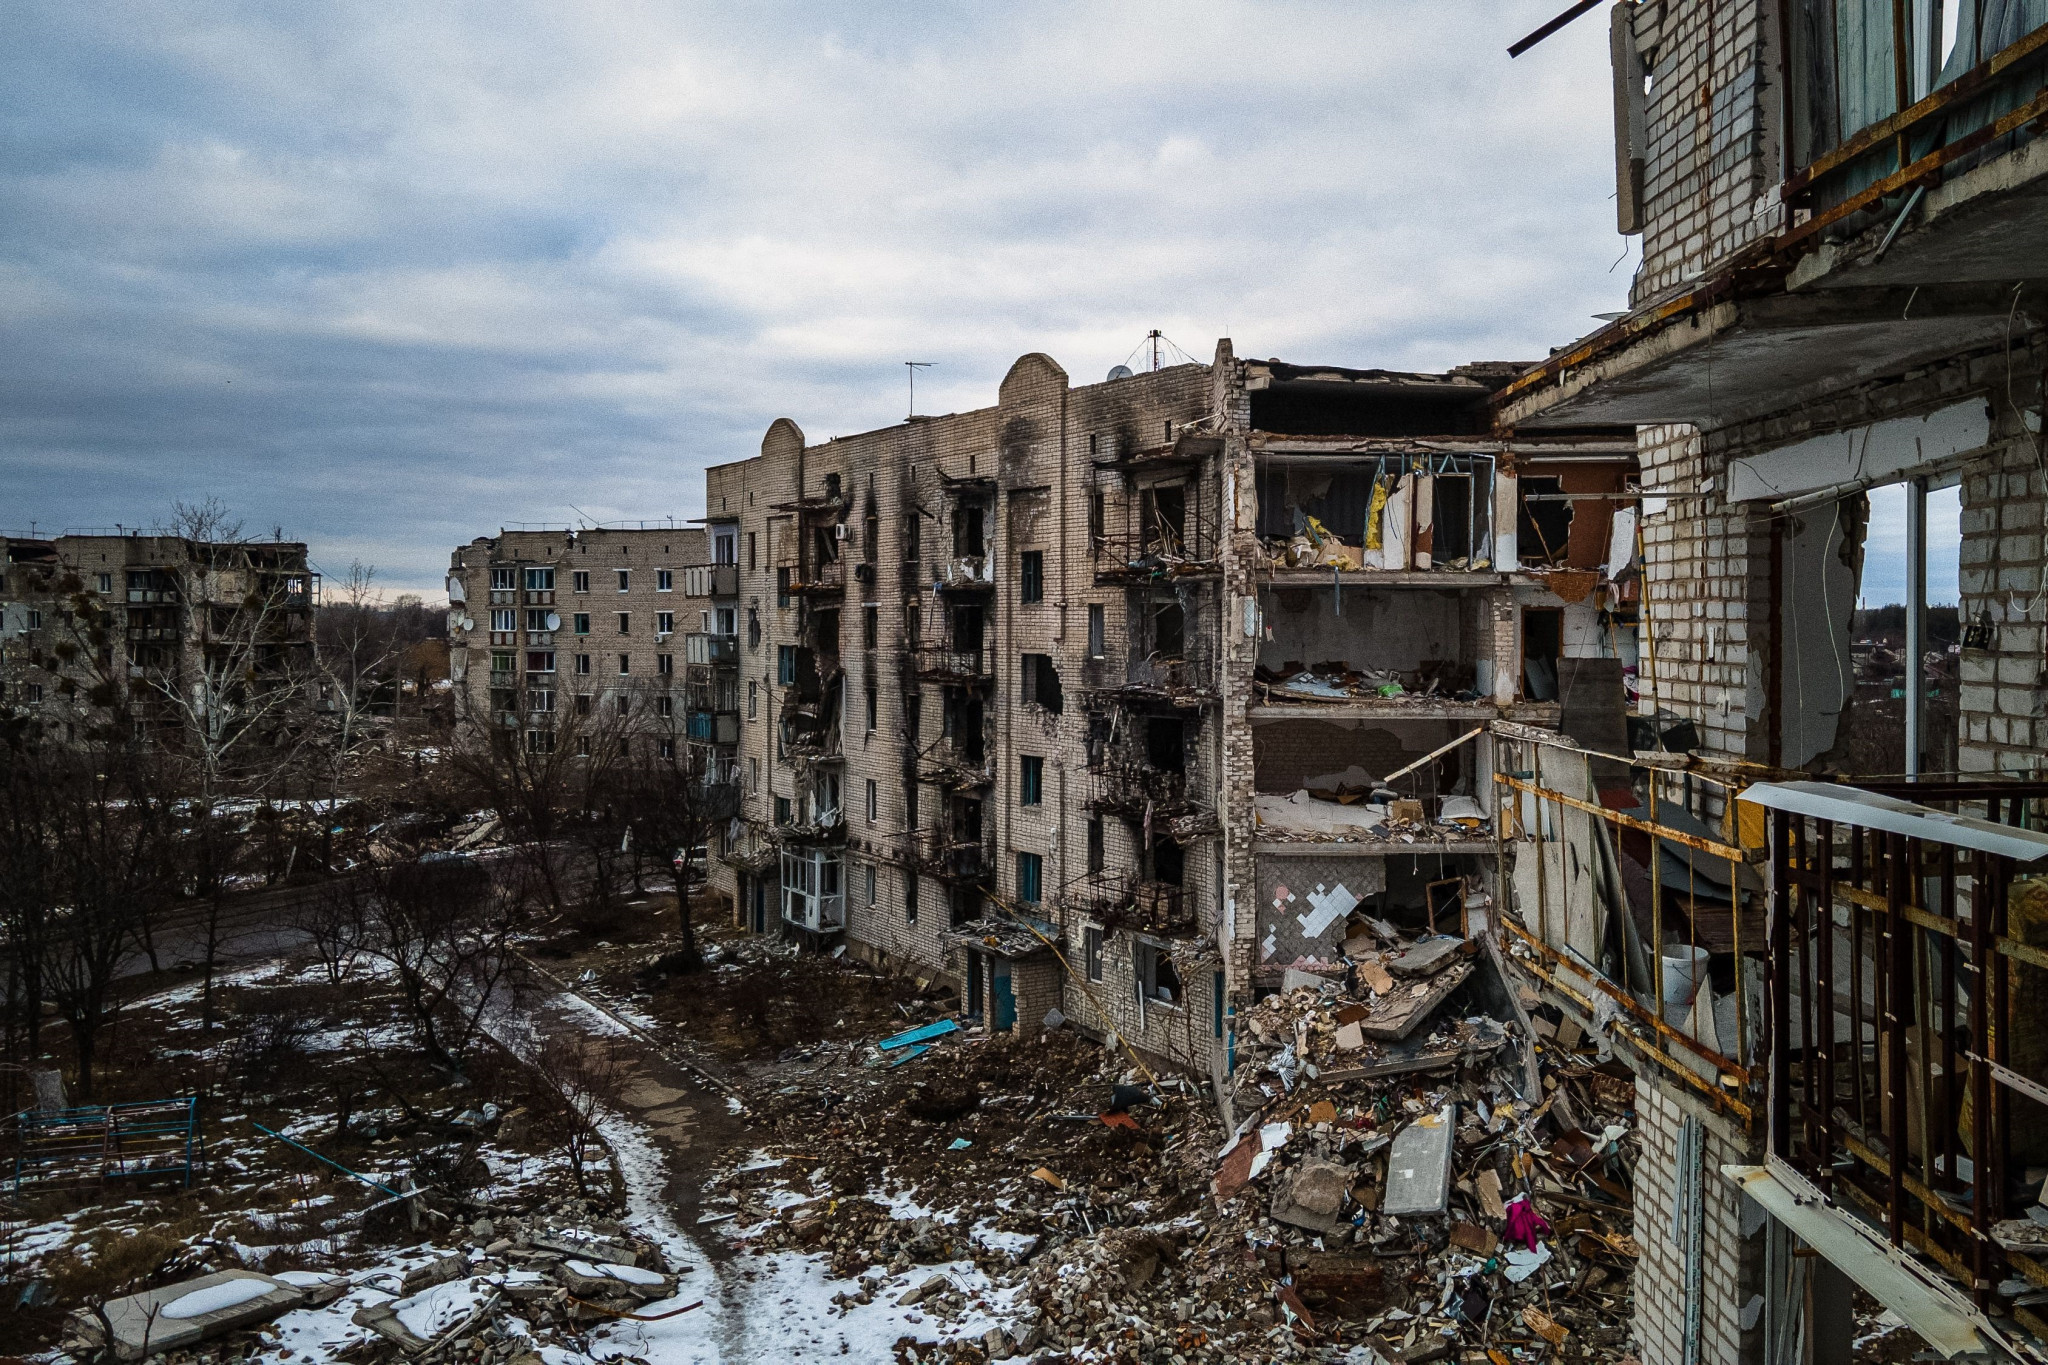 Russia invaded Ukraine on February 24, 2022, forcing citizens to evacuate the war zone ©Getty Images